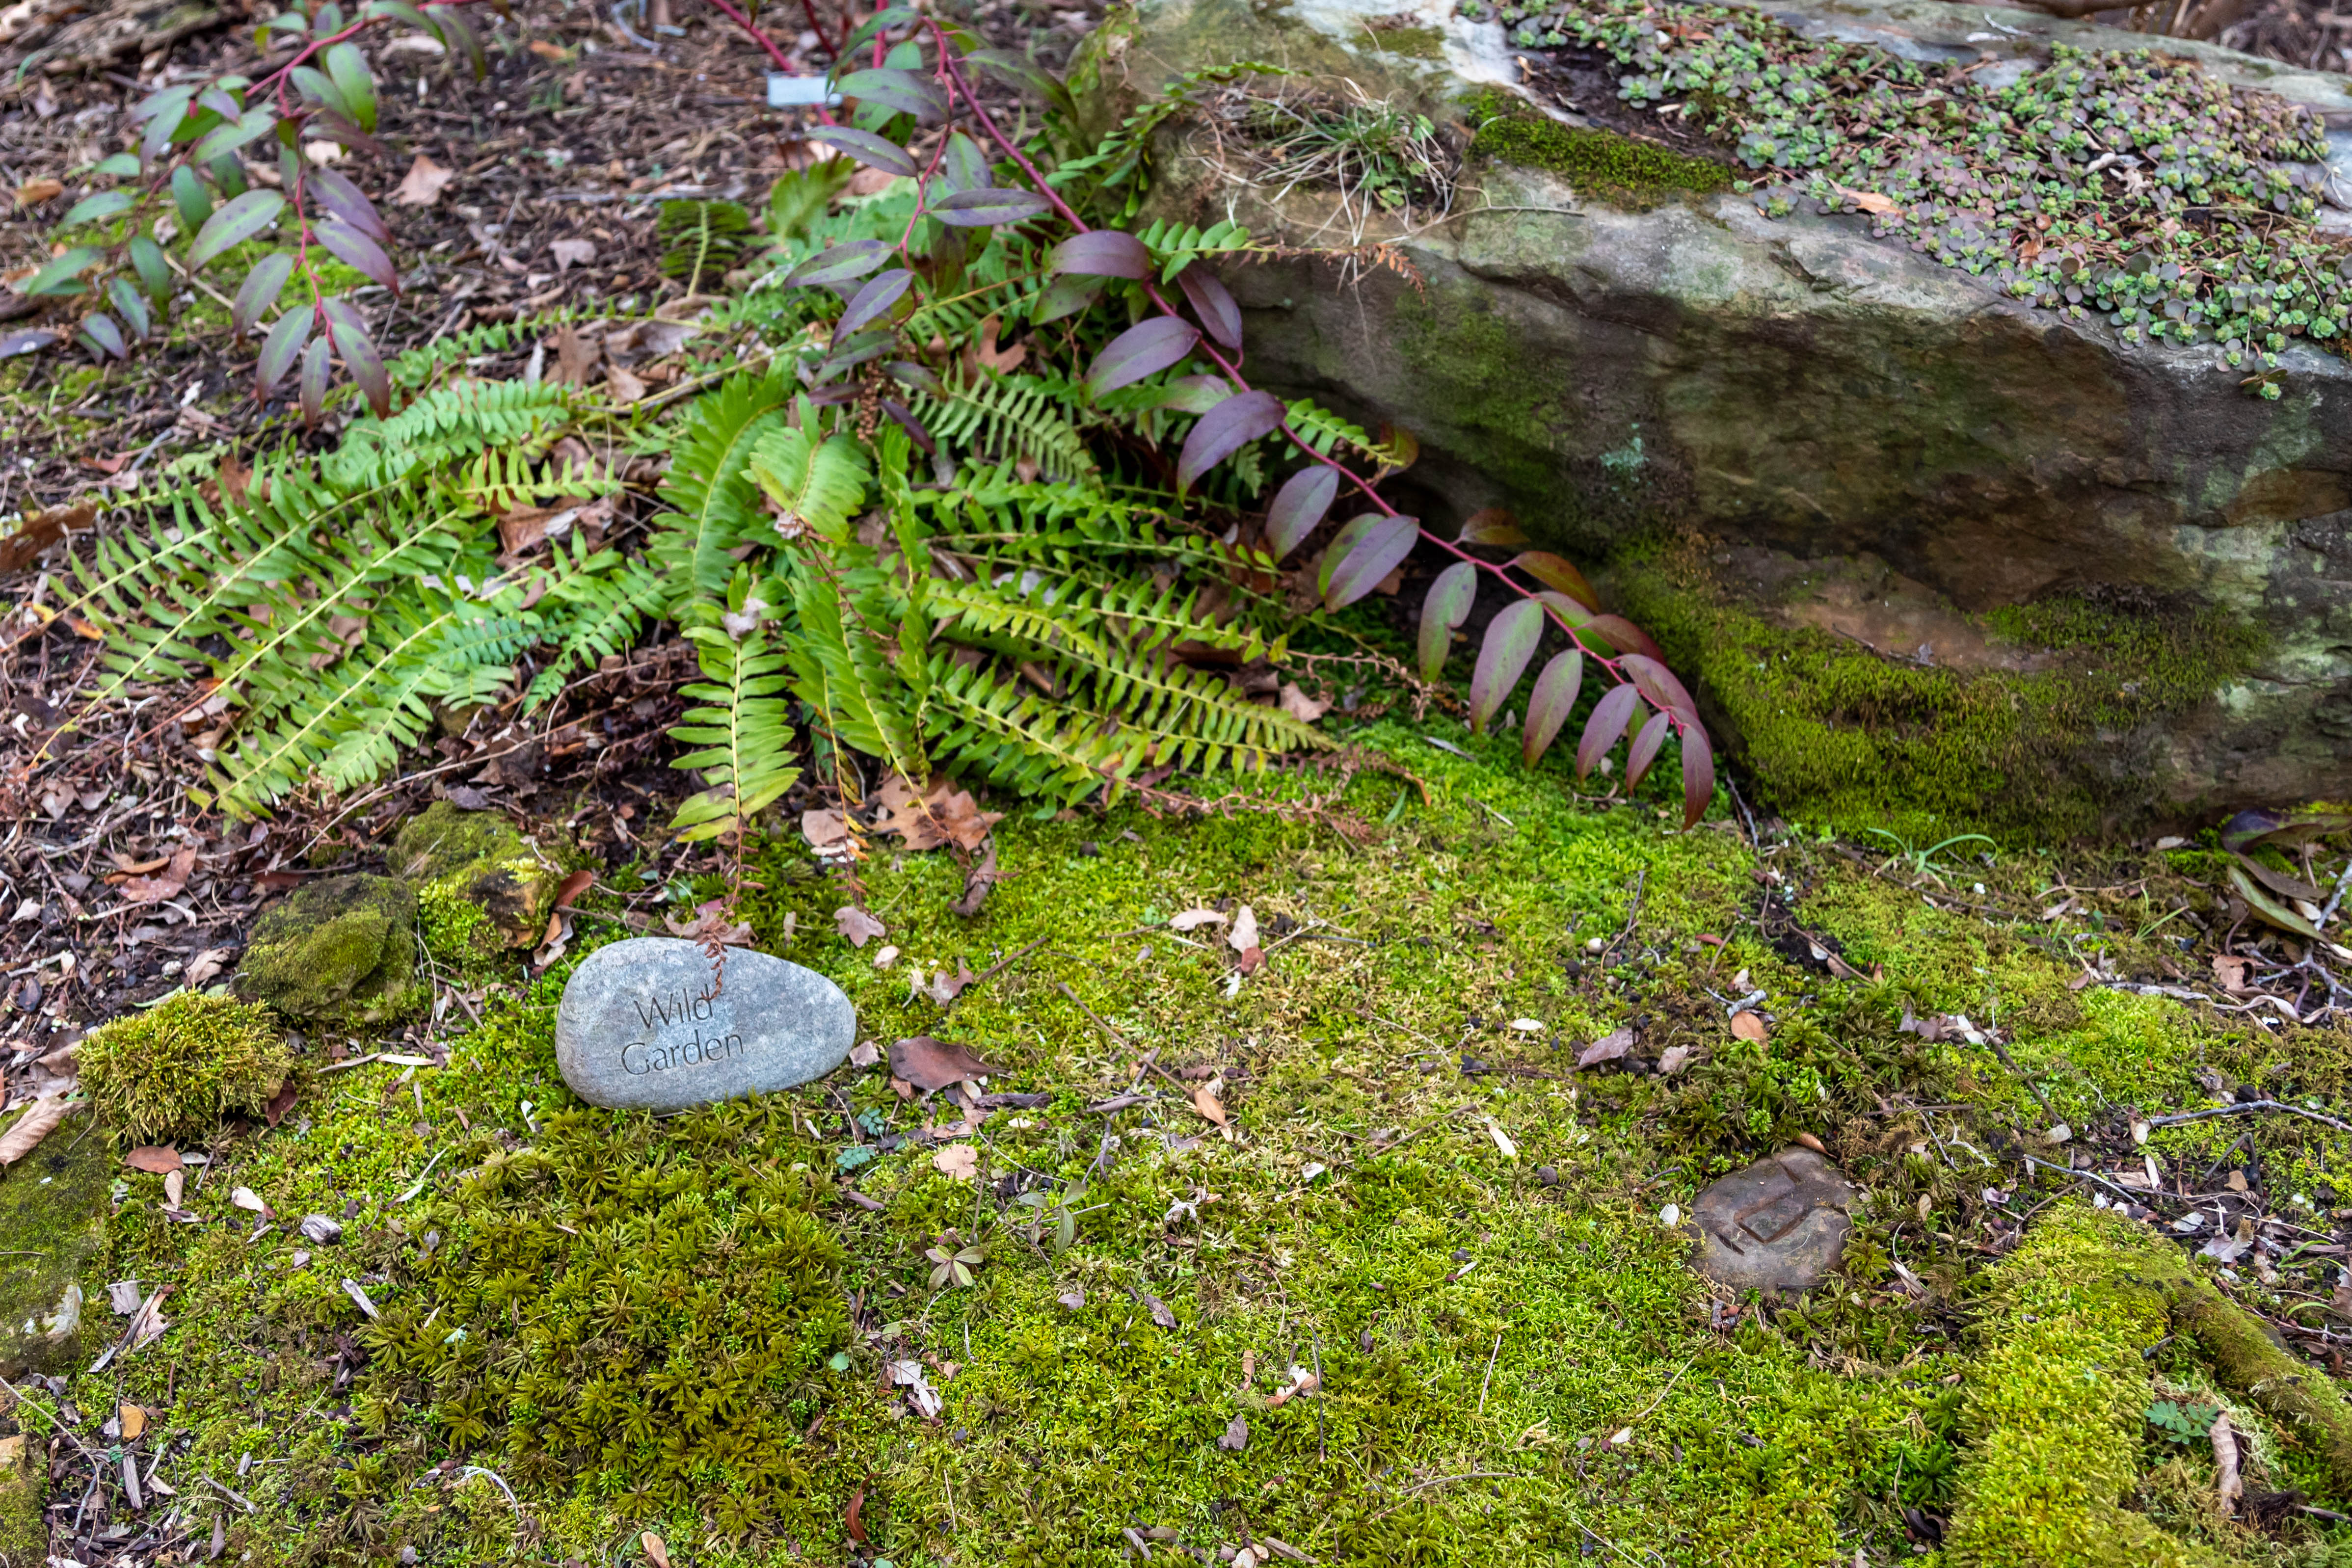 Moss garden with evergreen fern, evergreen fetterbush with red-tinted leaves, evergreen sedum, and decorative rocks